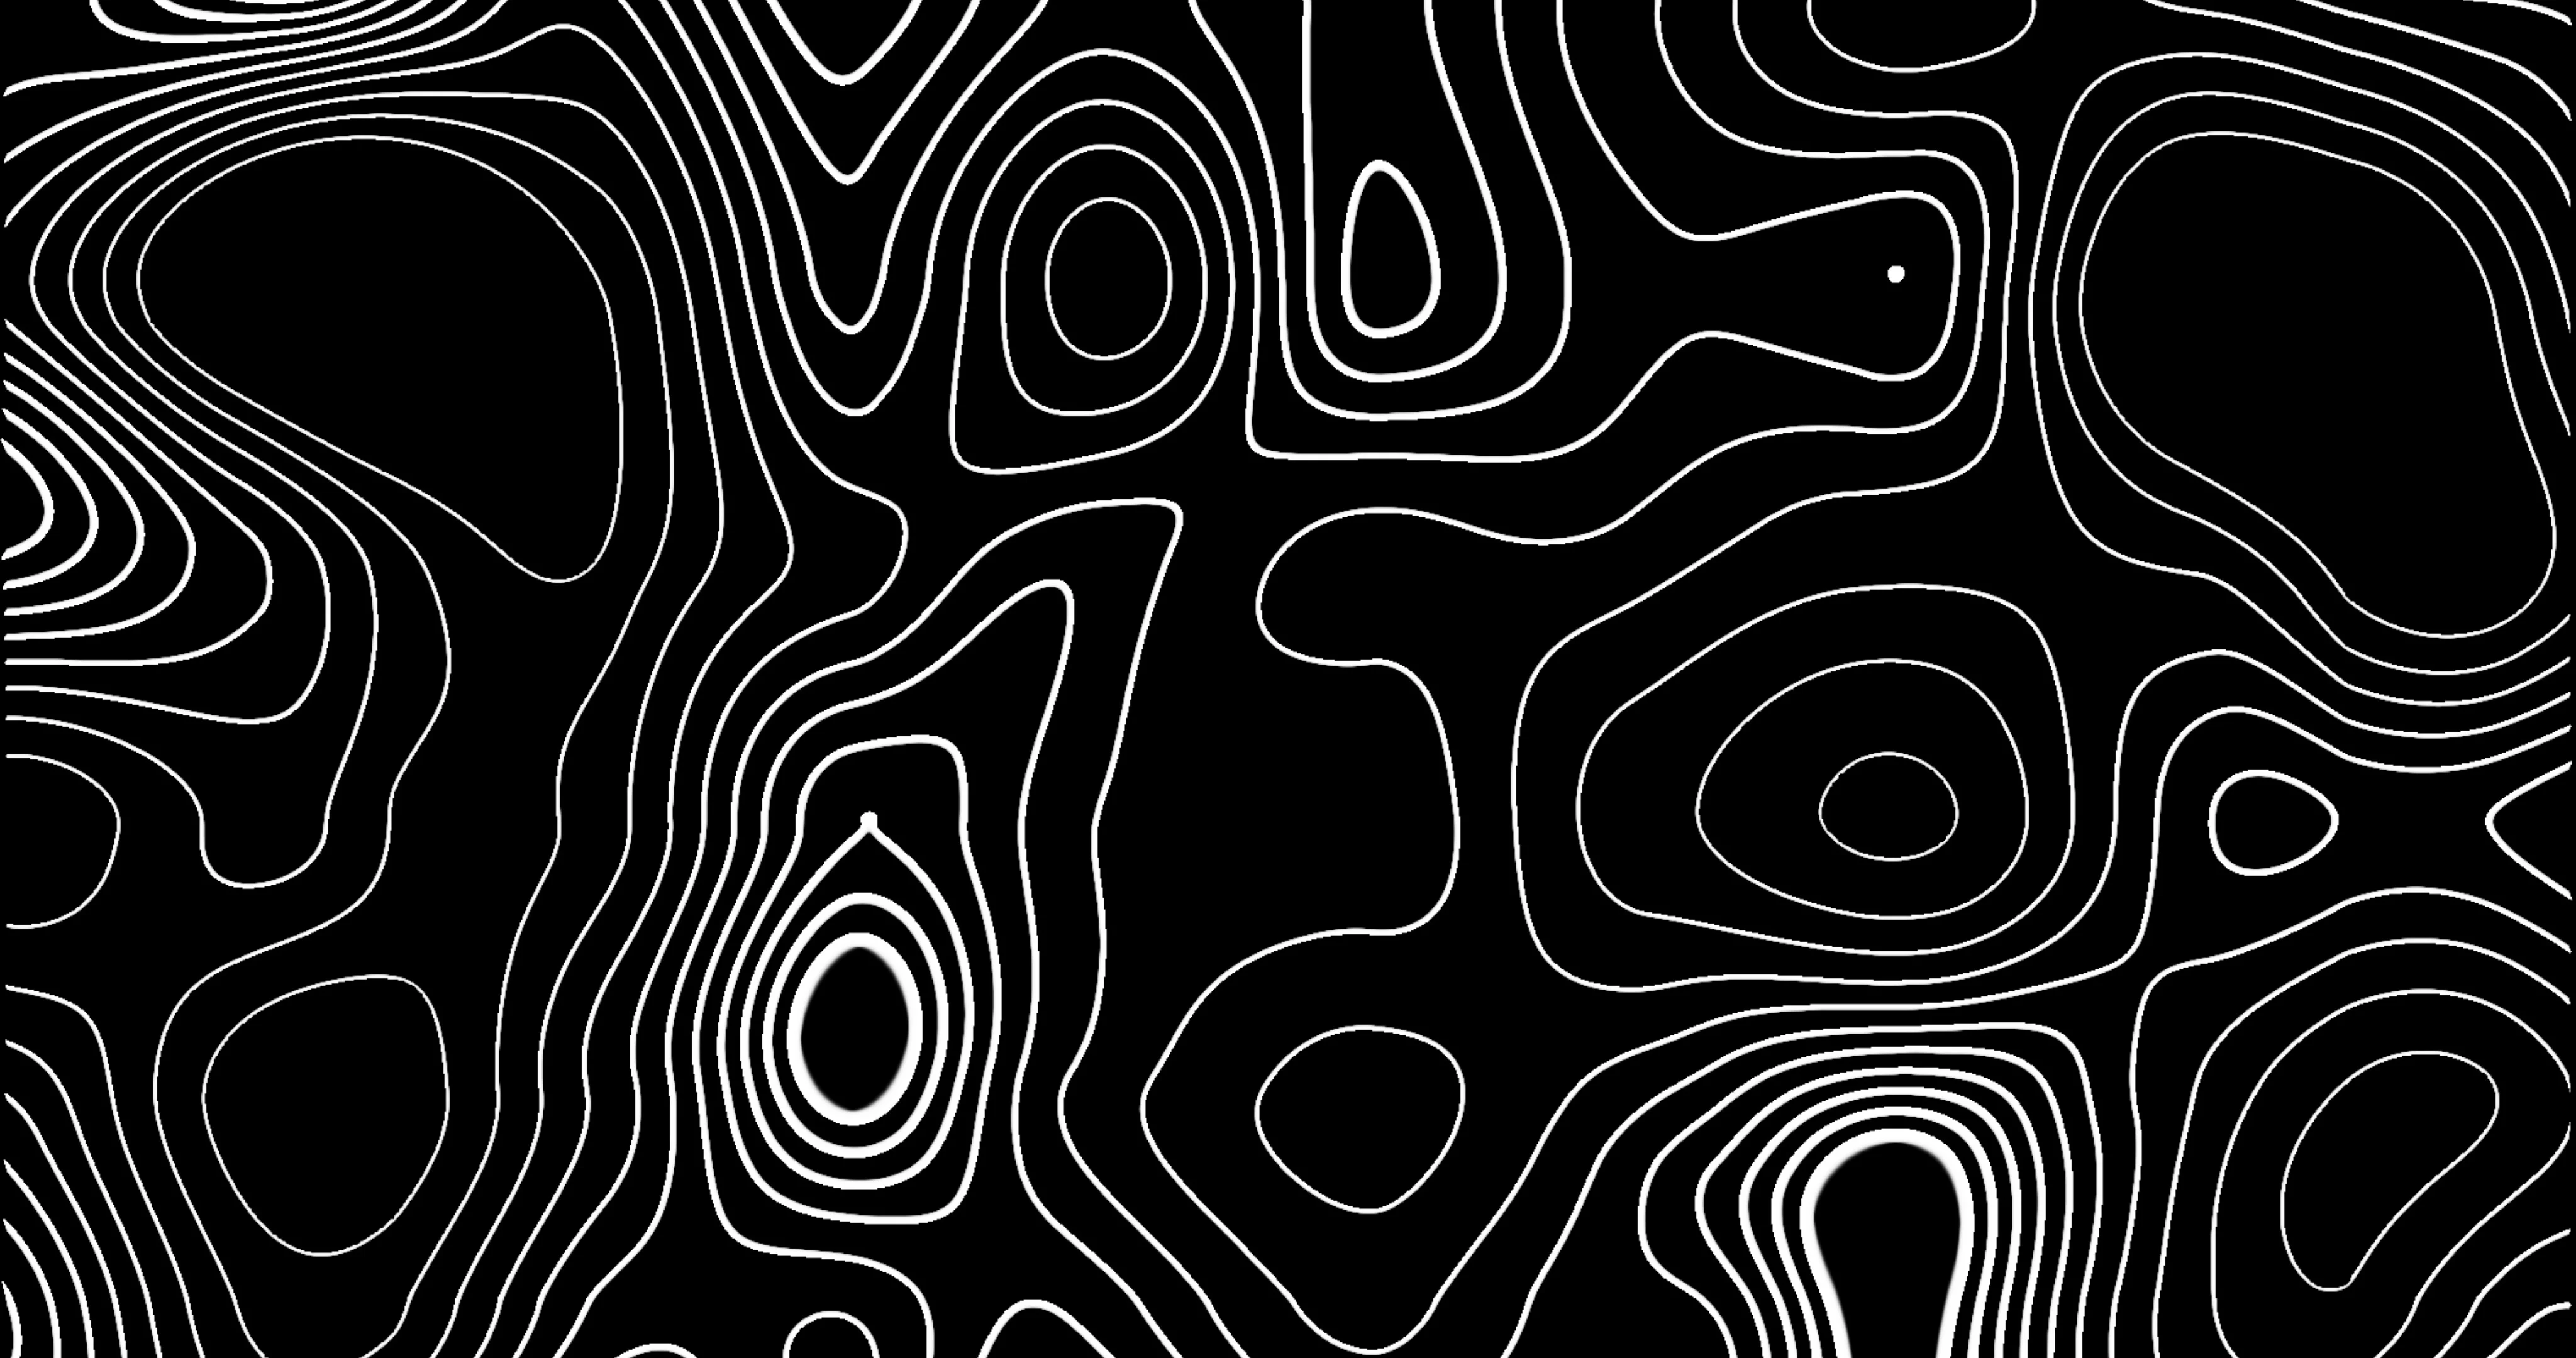 Black Shiny Black Watery Waves Background Loop, 3d Abstract